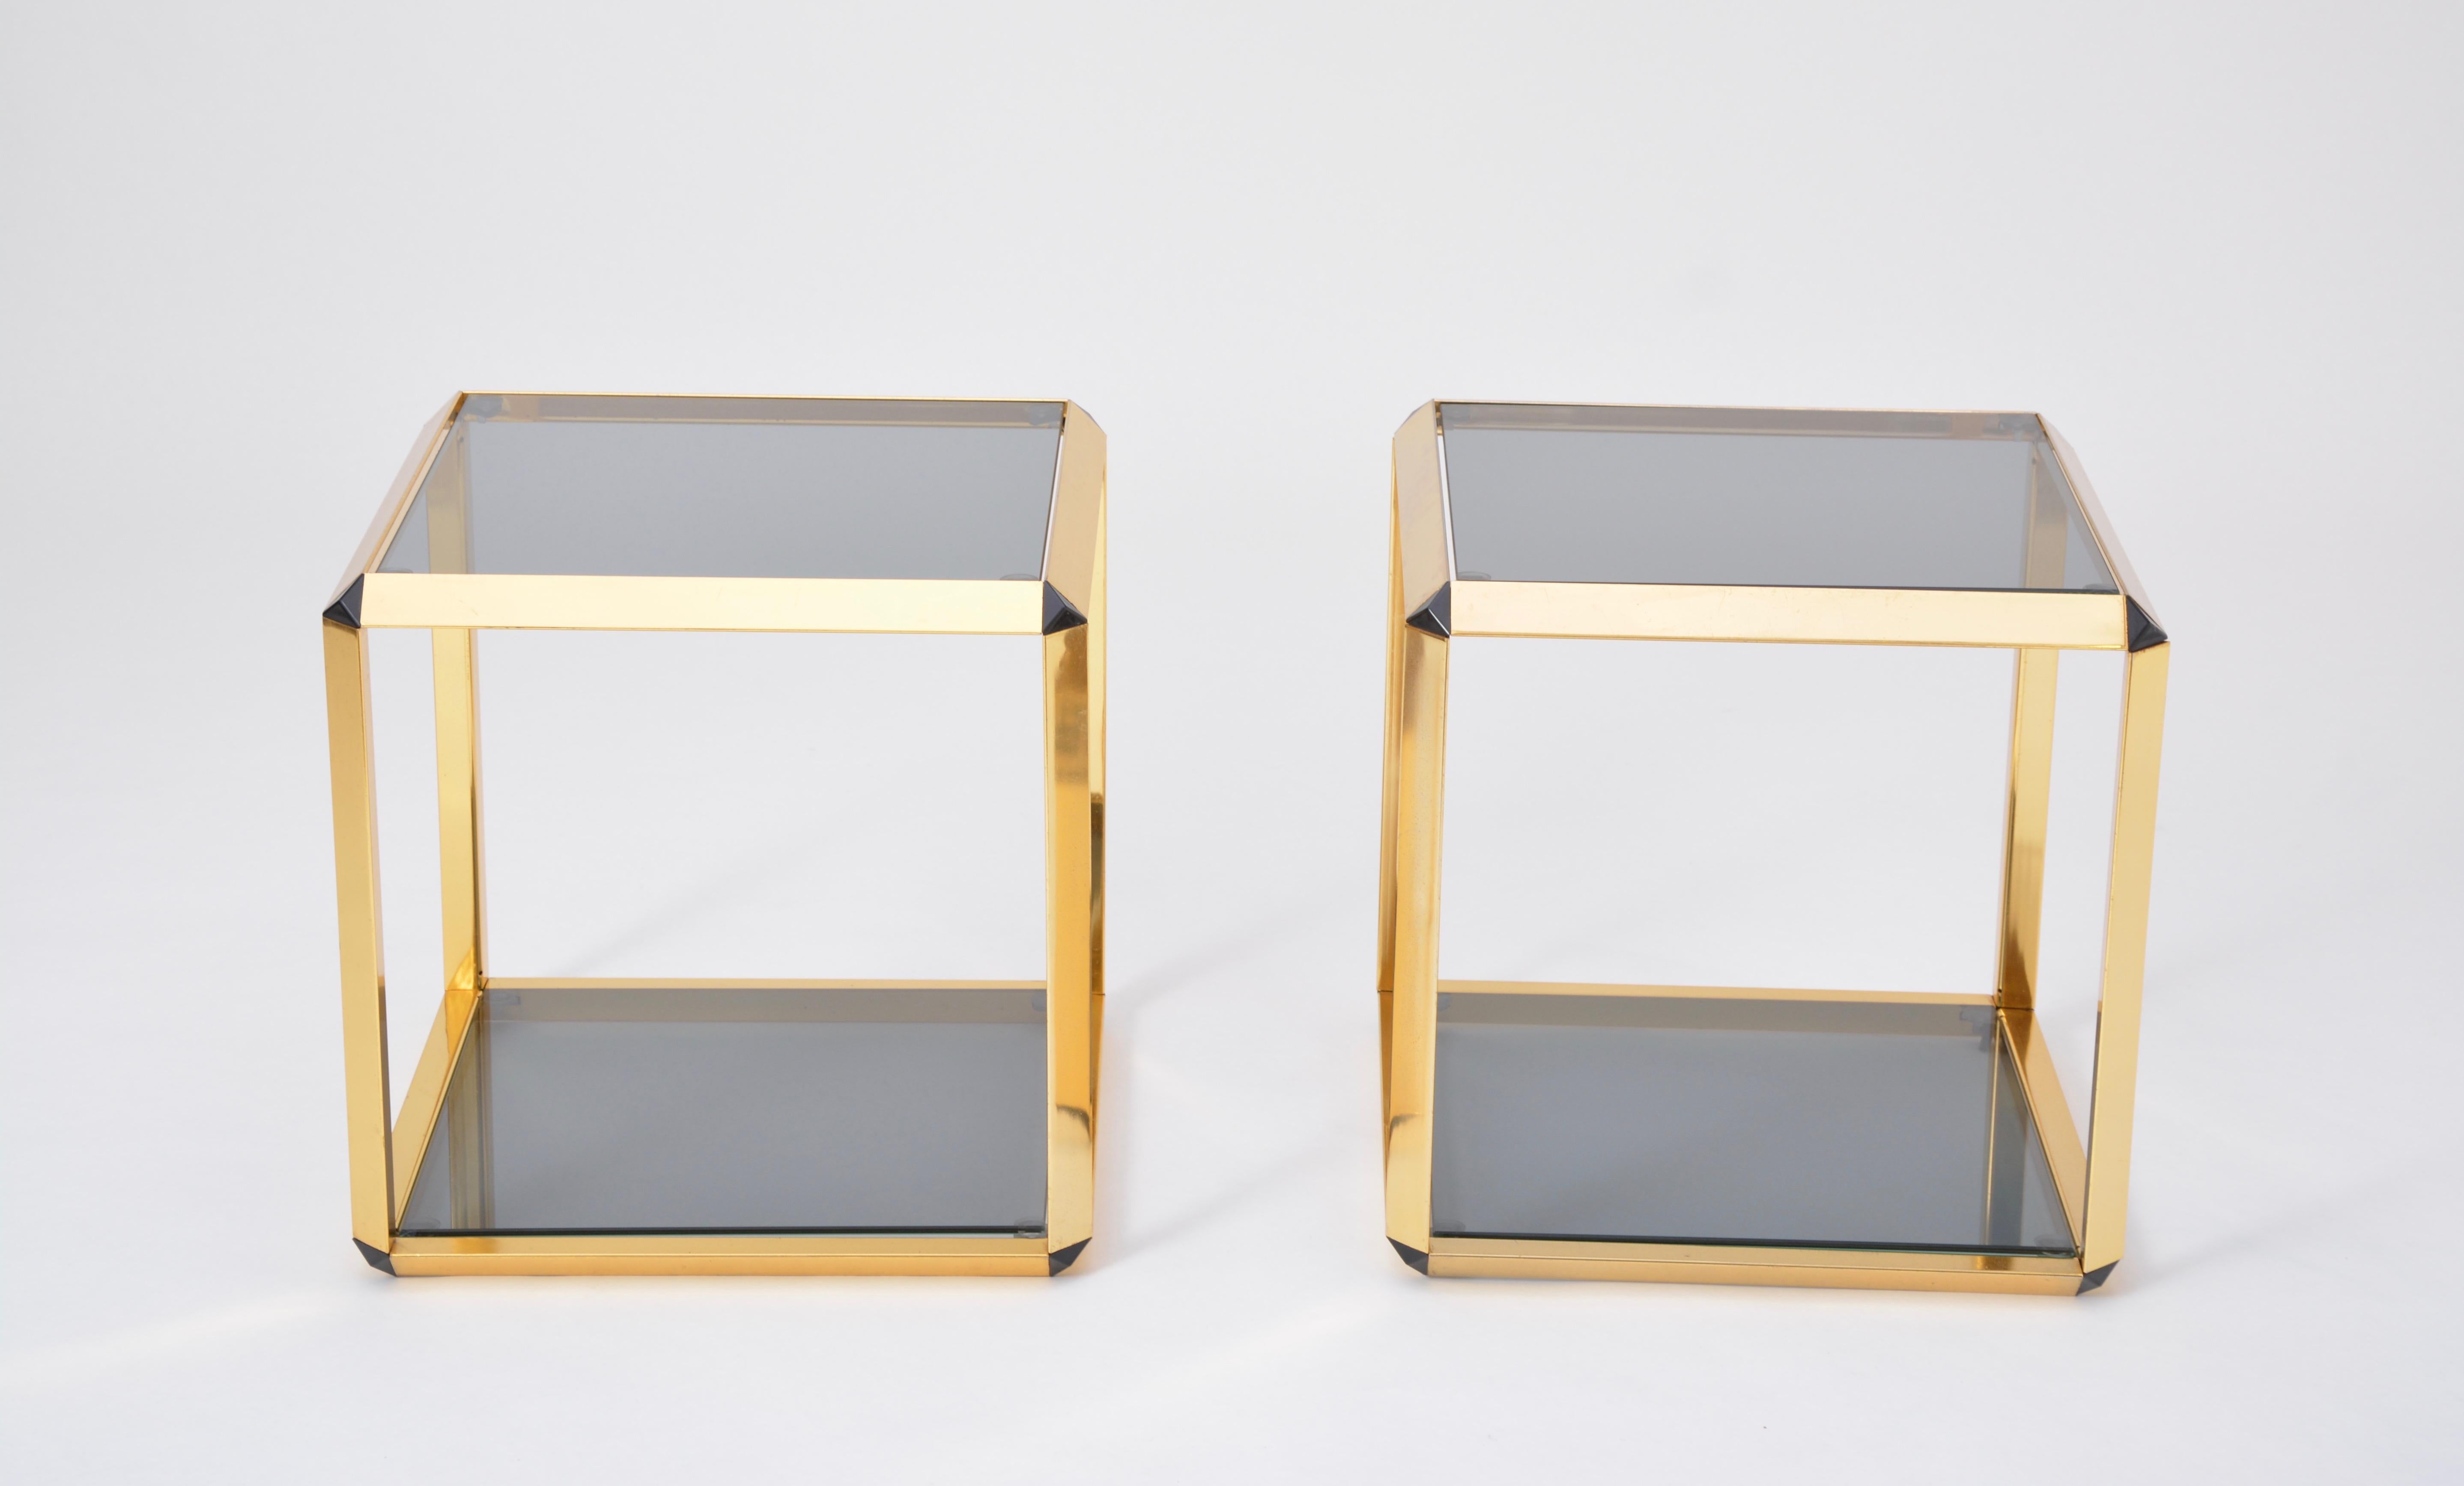 Pair of Mid-Century Modern Italian gold-rimmed metal and glass side tables 
Beautiful and rare pair of low tables in gold-colored steel frames with smoked glass tops produced in the 1970s in Italy. Gold color version 
Glasses, hooks and suction